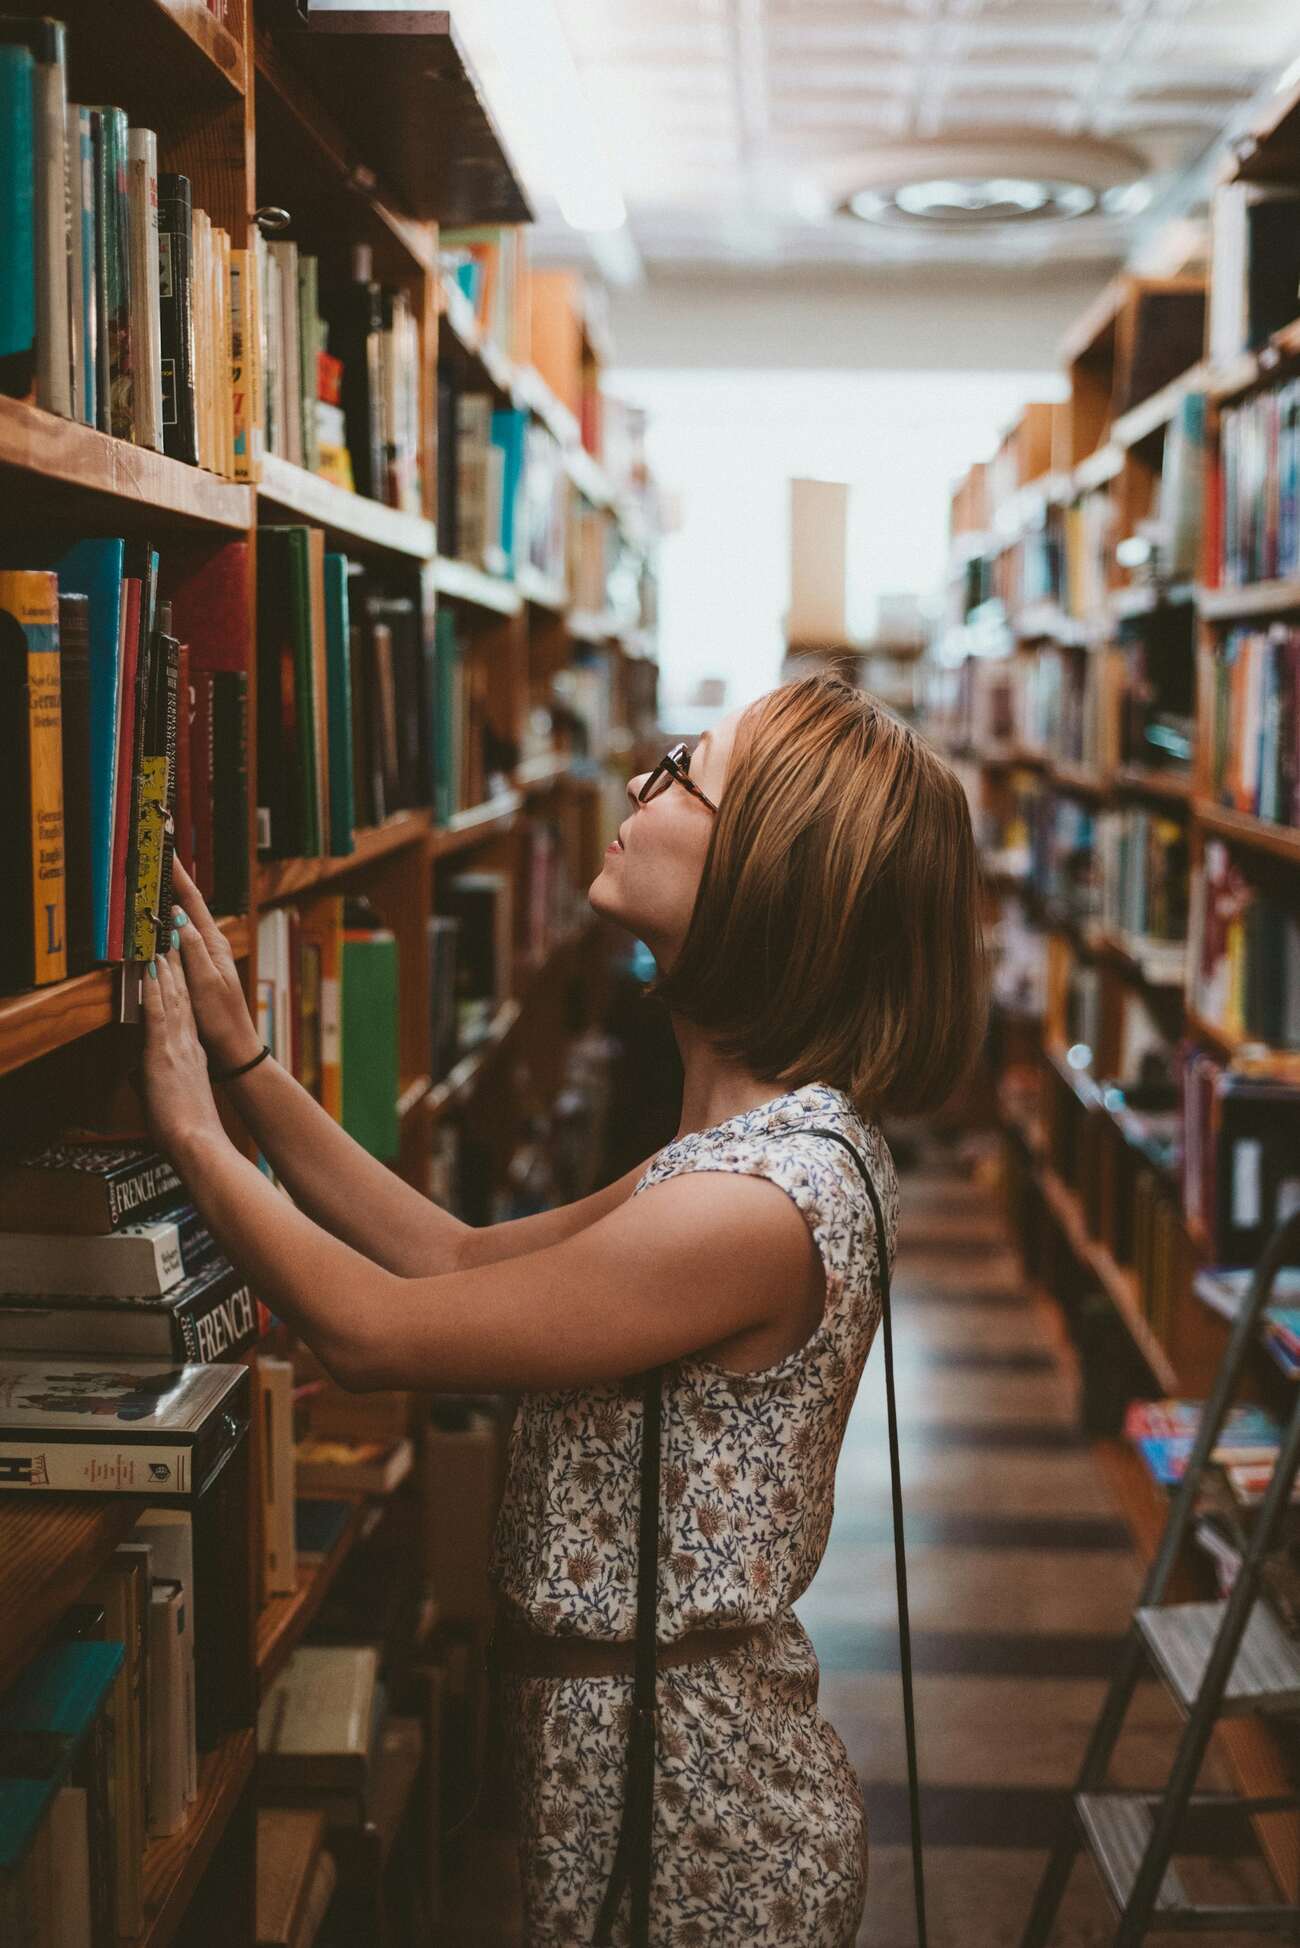 A woman browsing books in a library, surrounded by shelves filled with various titles